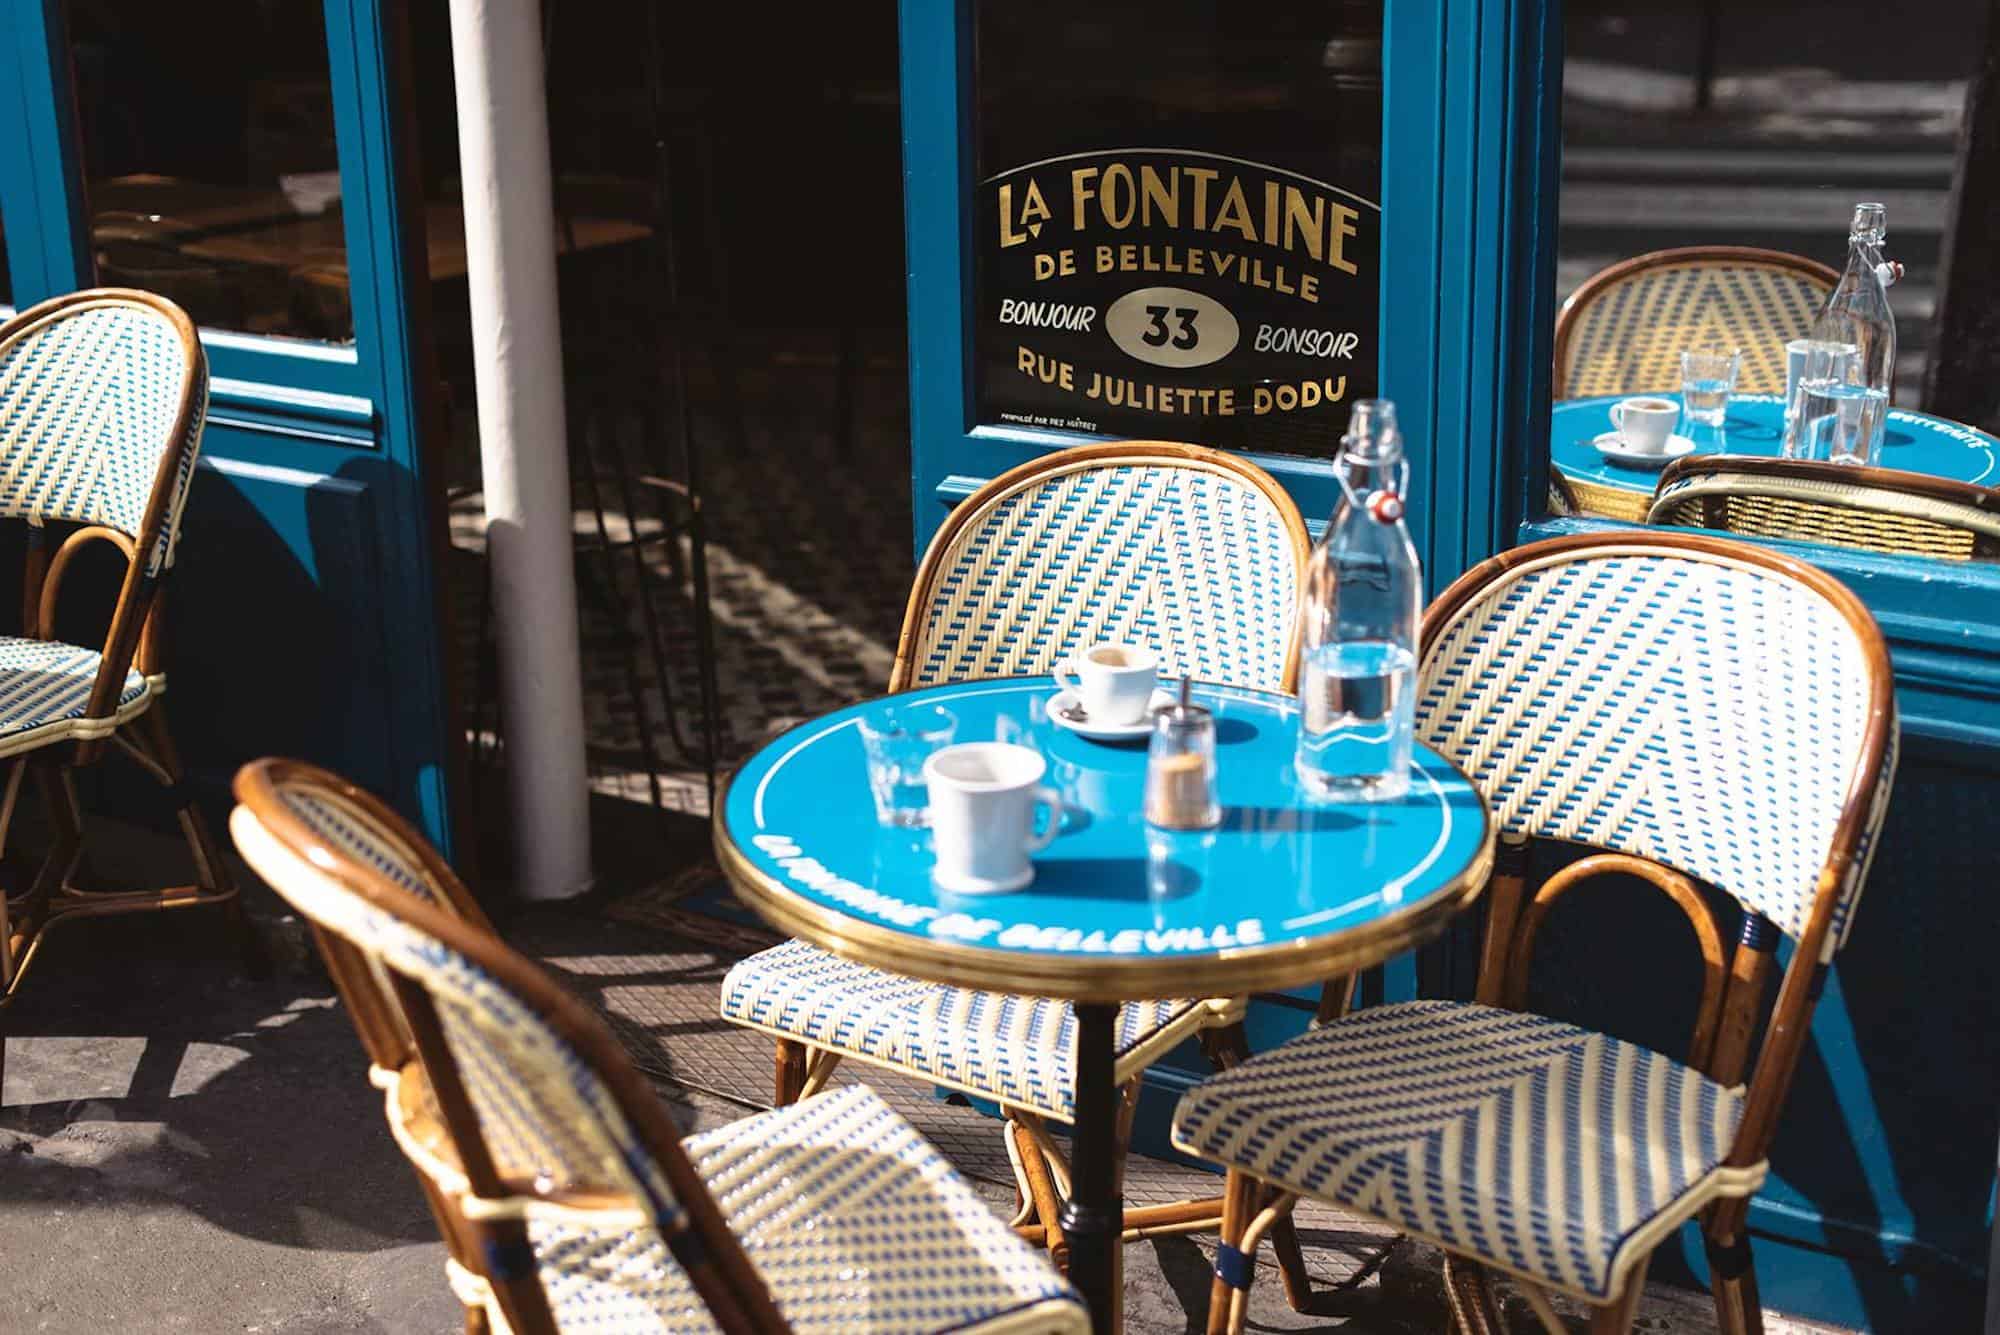 HiP Paris Blog rounds up the top brunch spots in Paris like the Fontaine de Belleville cafe and its blue exterior and outdoor seating area.